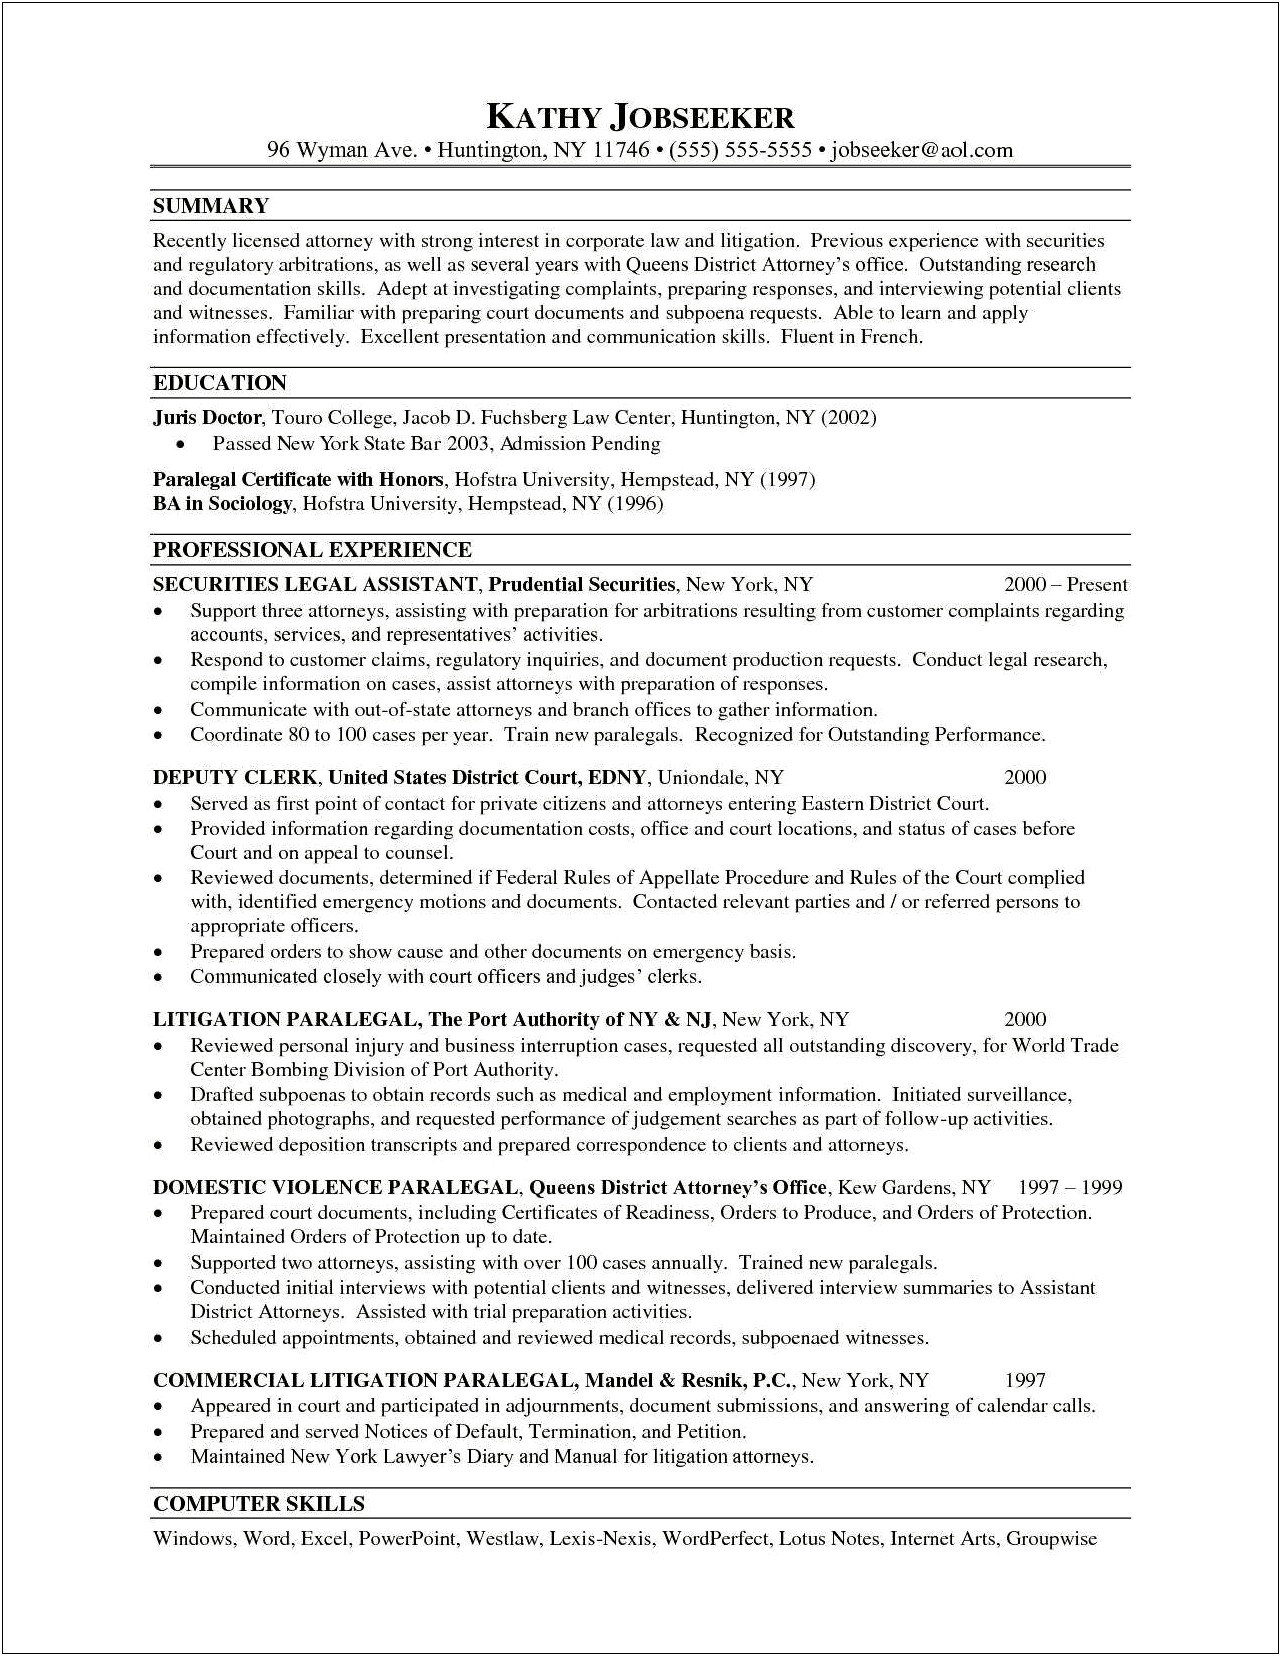 Personal Injury Paralegal Resume Examples